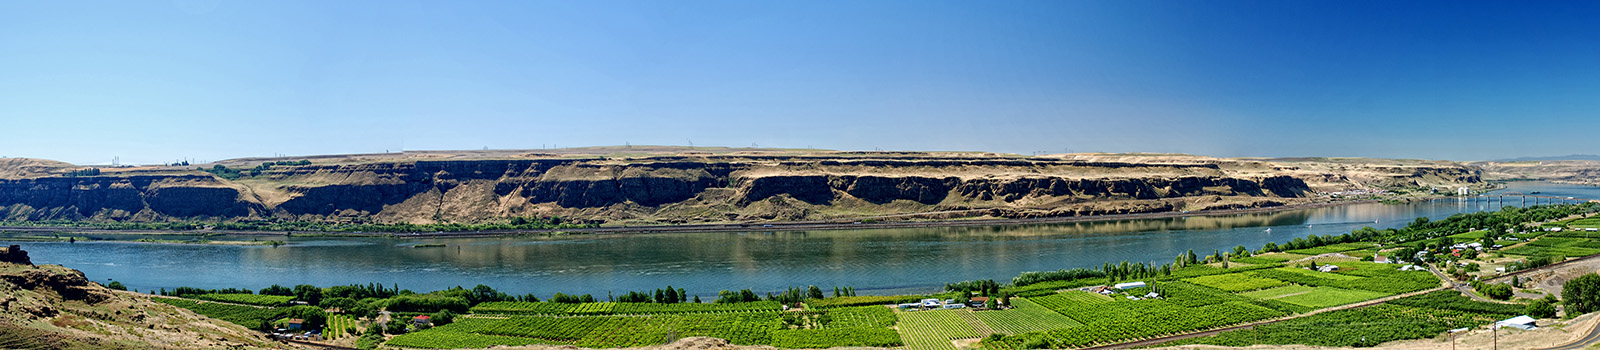 Panoramic photo of the Columbia river with blue skies